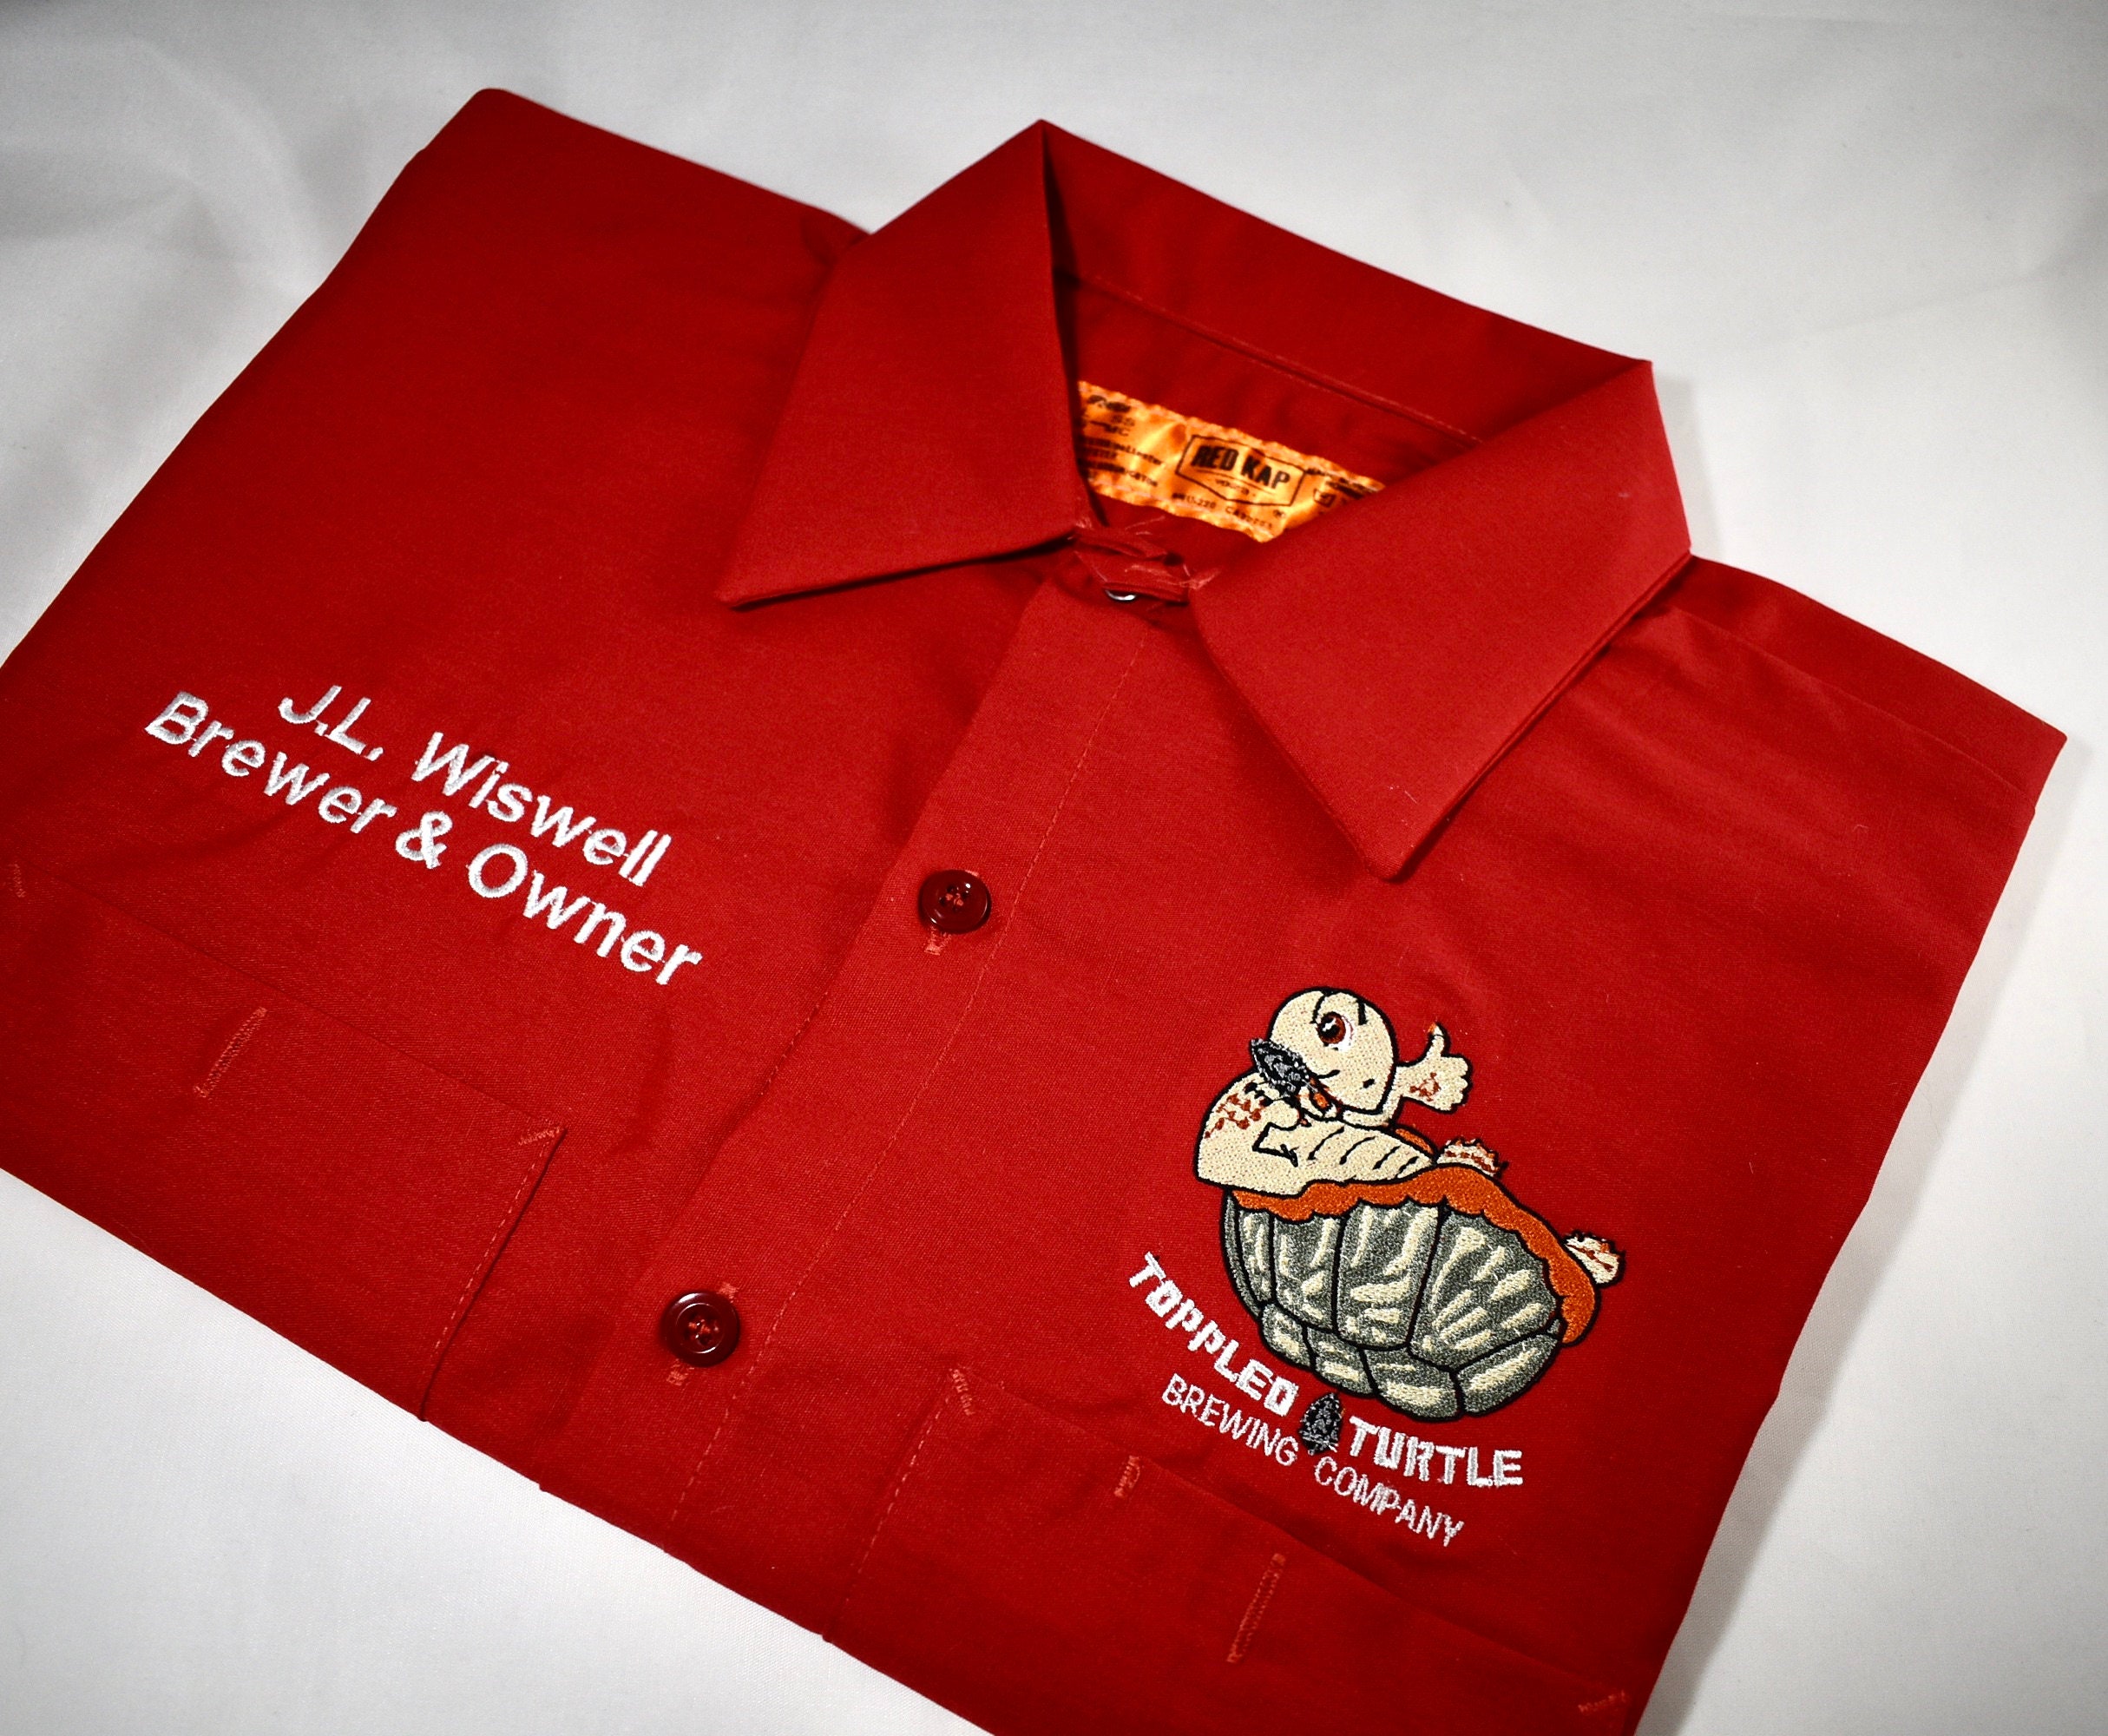 RED KAP Short Sleeve Industrial Work Shirts 20 COLORS Custom Uniform Shirt  Embroidered Logos Available 